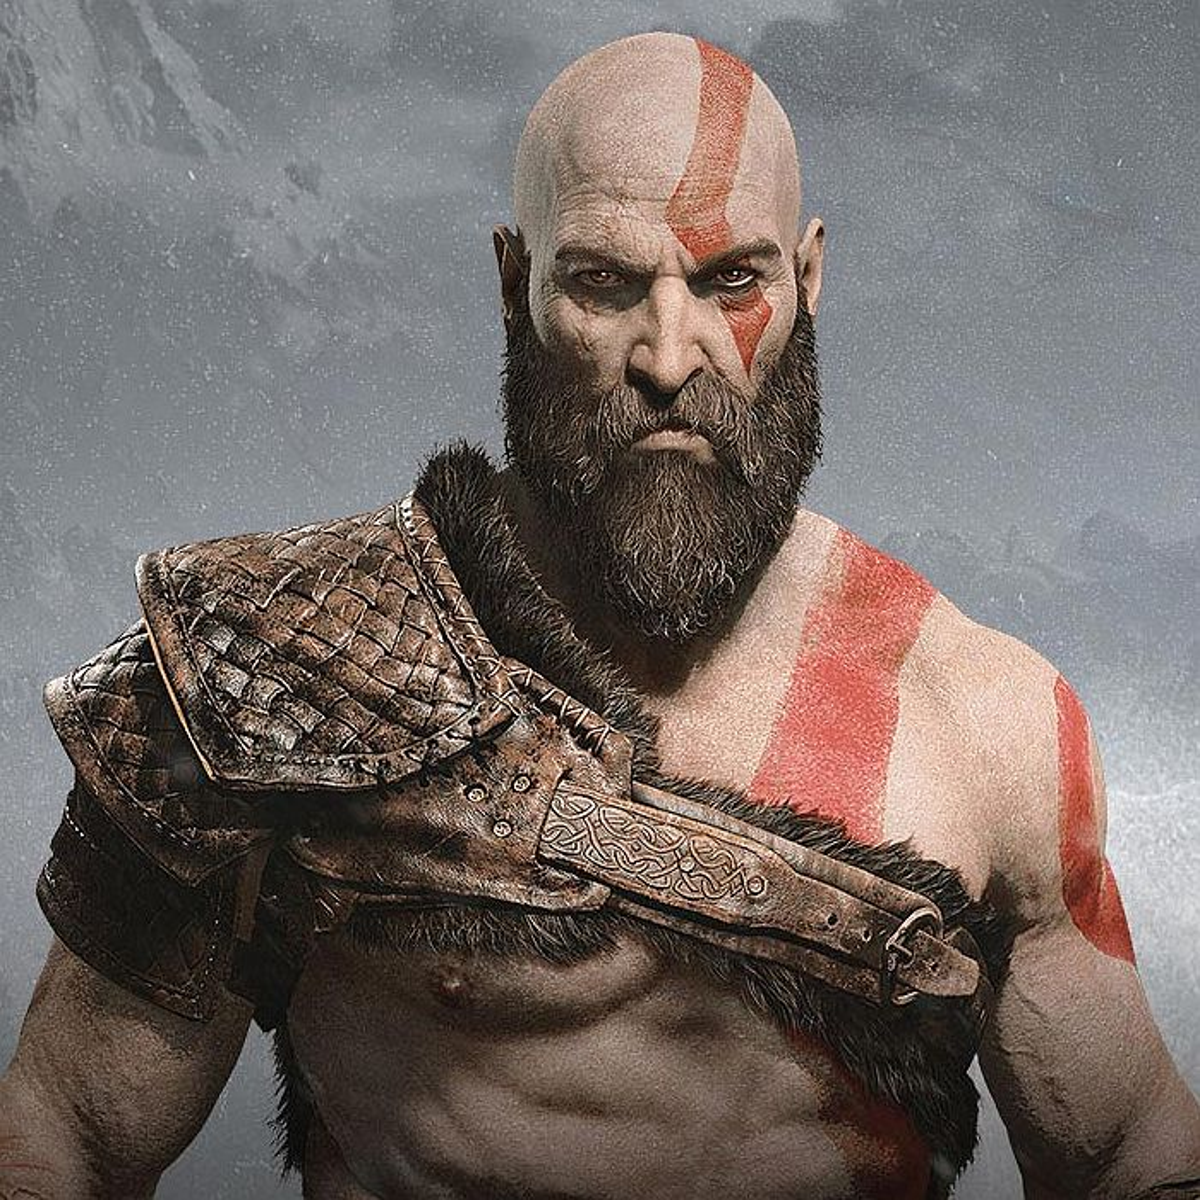 Game of the Year 2018: #1 - God of War